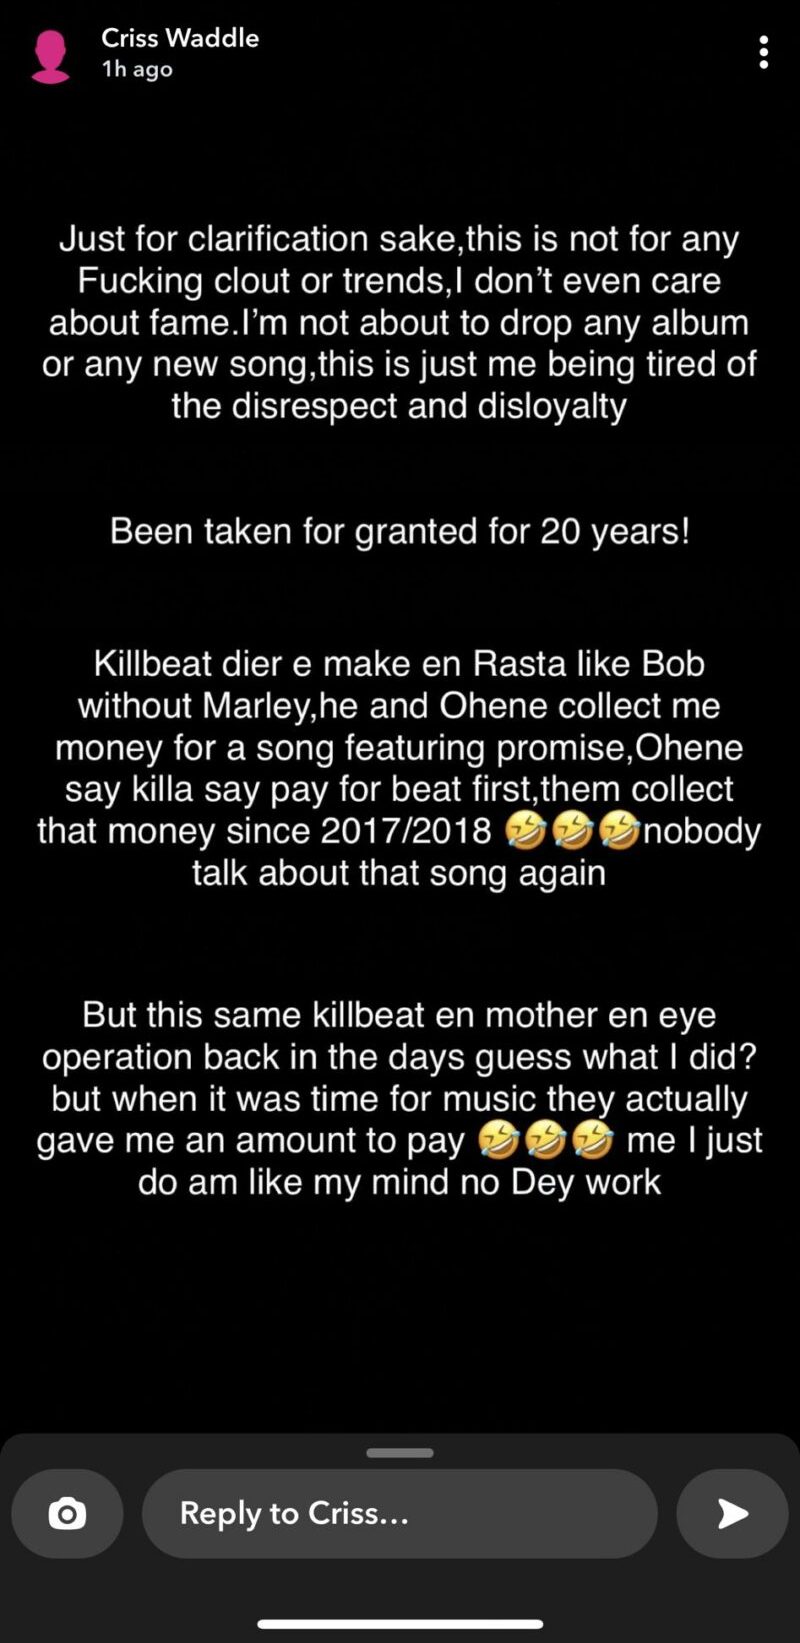 Criss Waddle fumes at R2 Bees and King Promise on snapchat